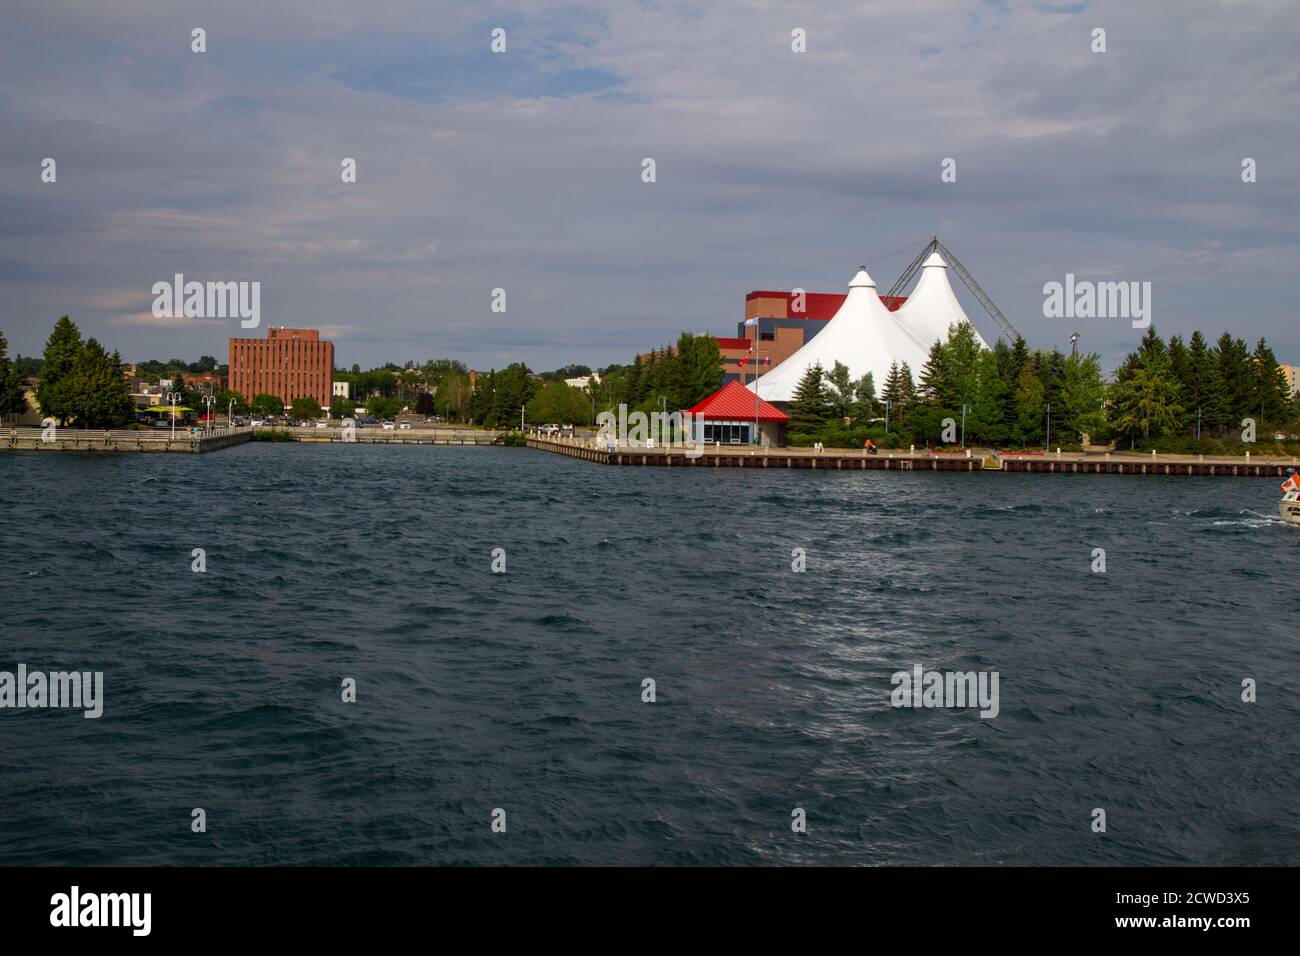 Sault Ste Marie, Ontario, Canada - August 9, 2015: The waterfront district of the small tourist town of Sault Ste Marie, Ontario Stock Photo